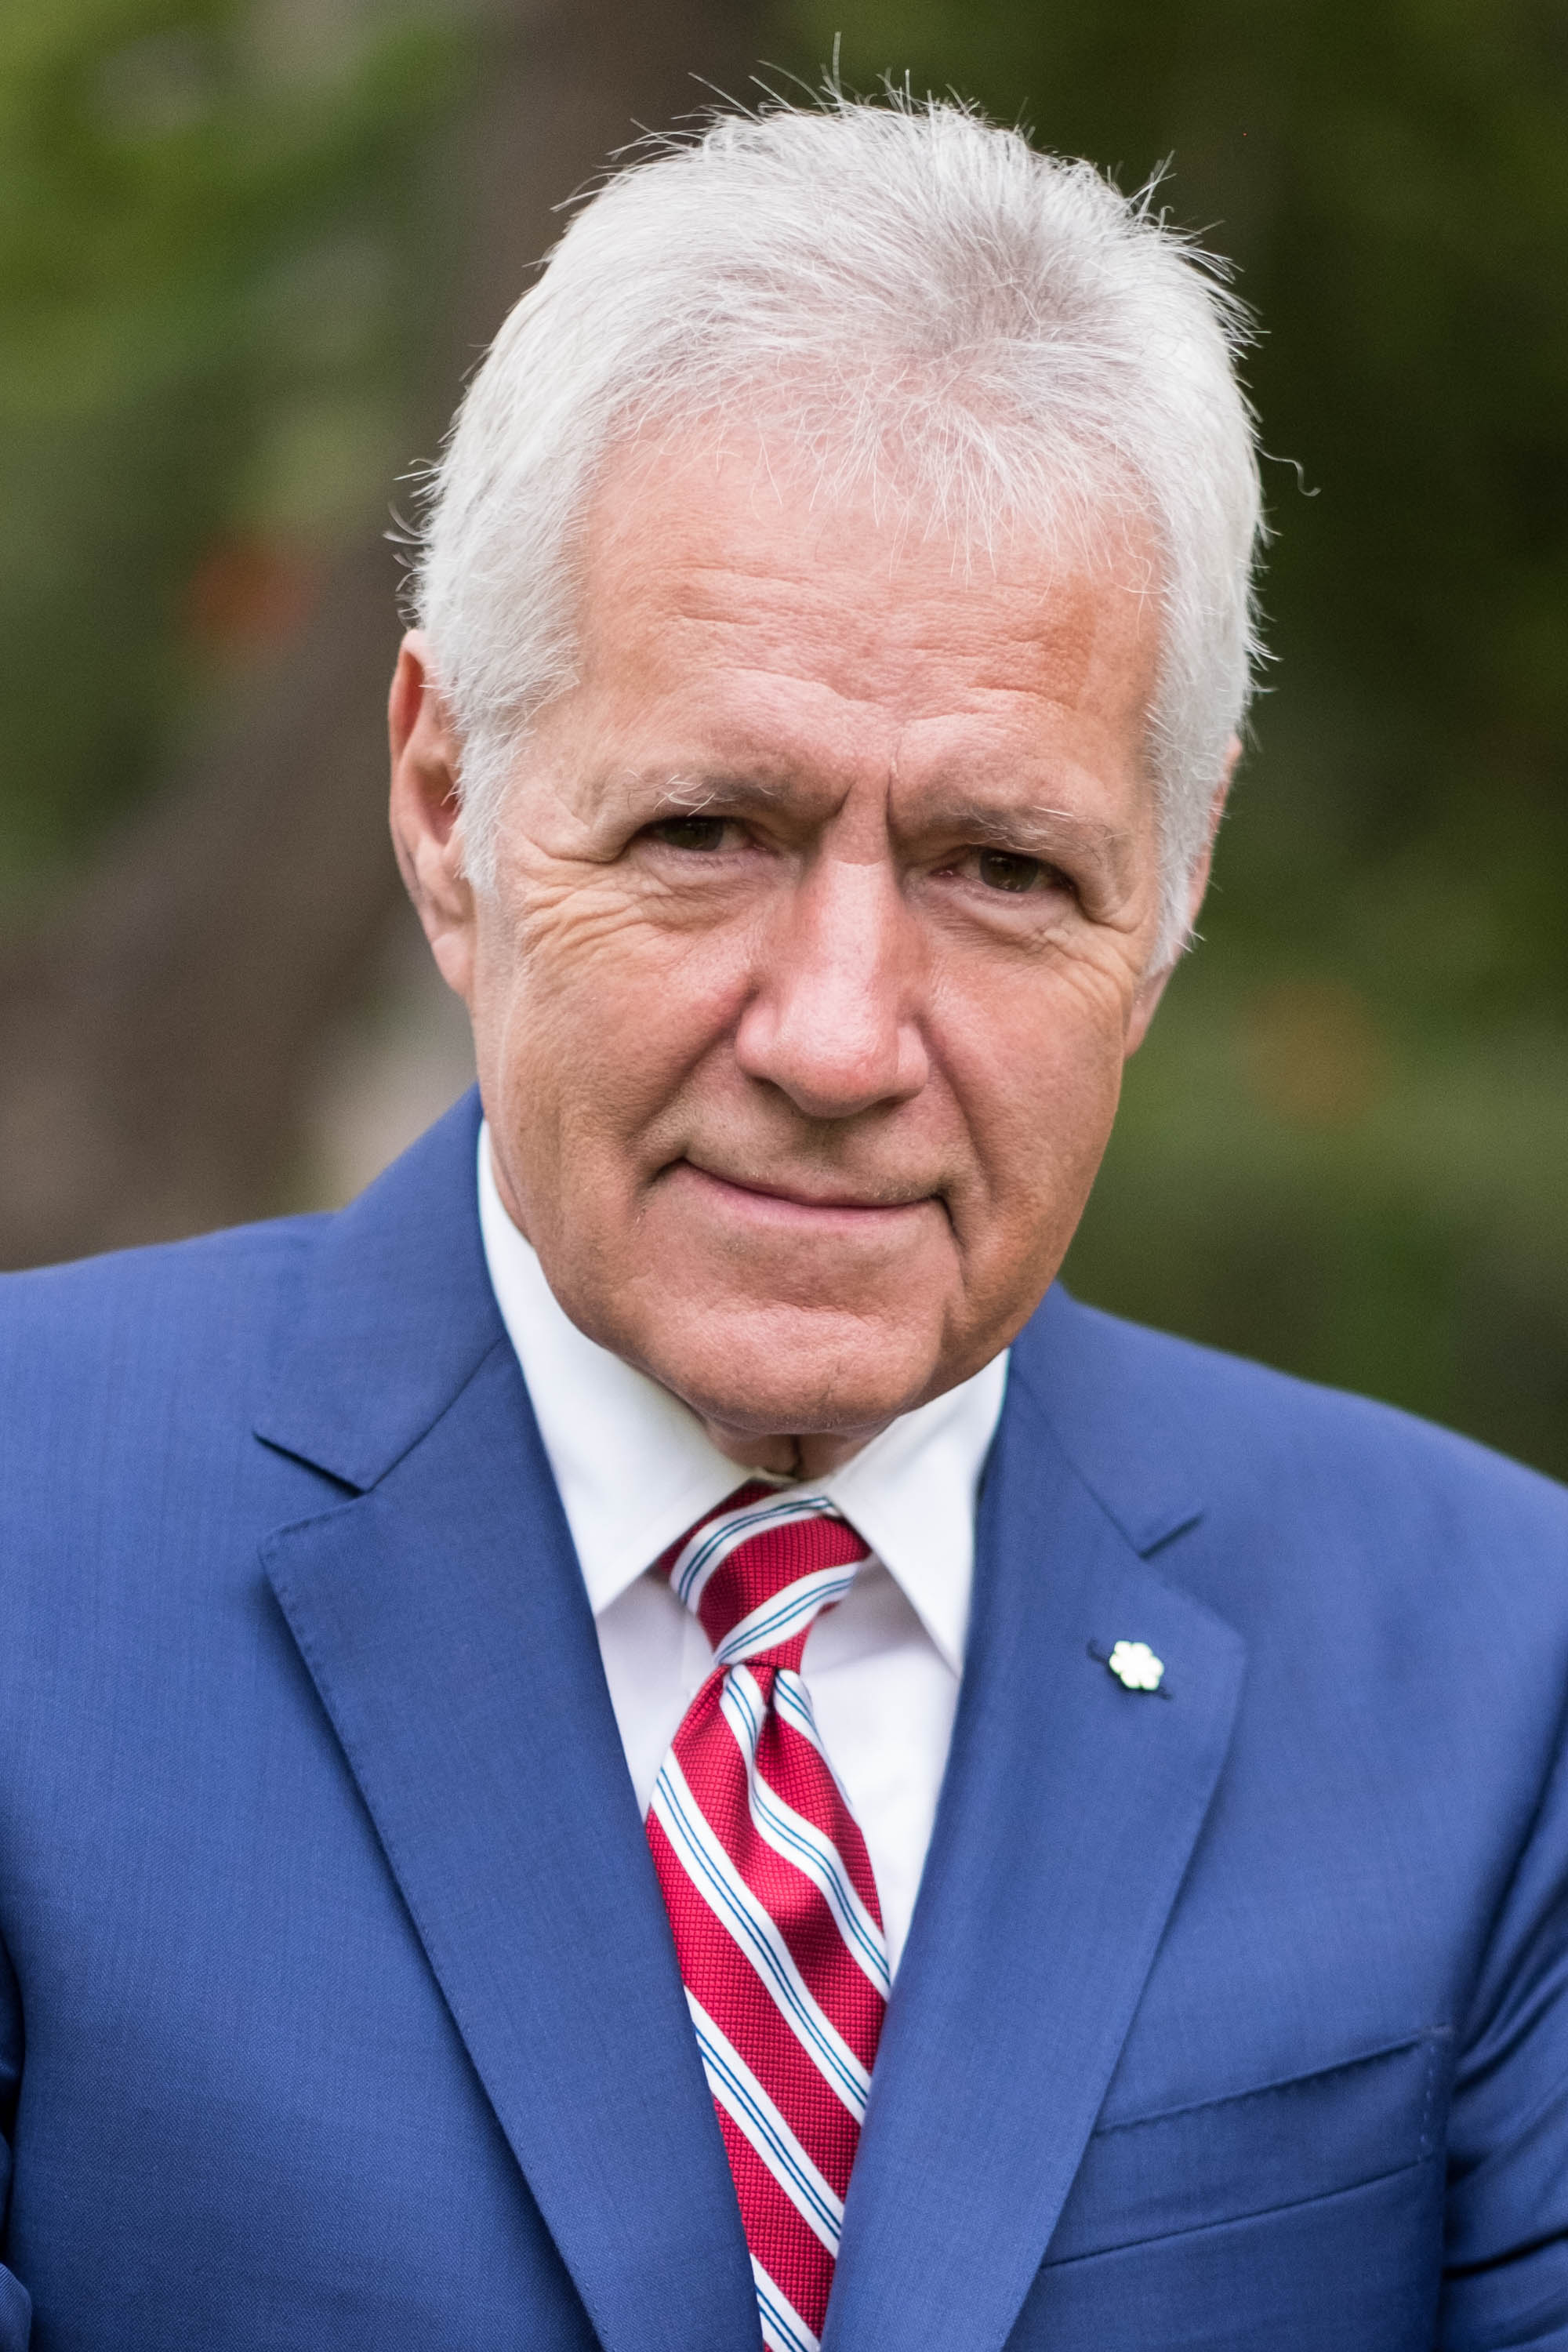 Alex Trebek attends the 150th anniversary of Canada's Confederation on June 30, 2017. | Photo: Getty Images